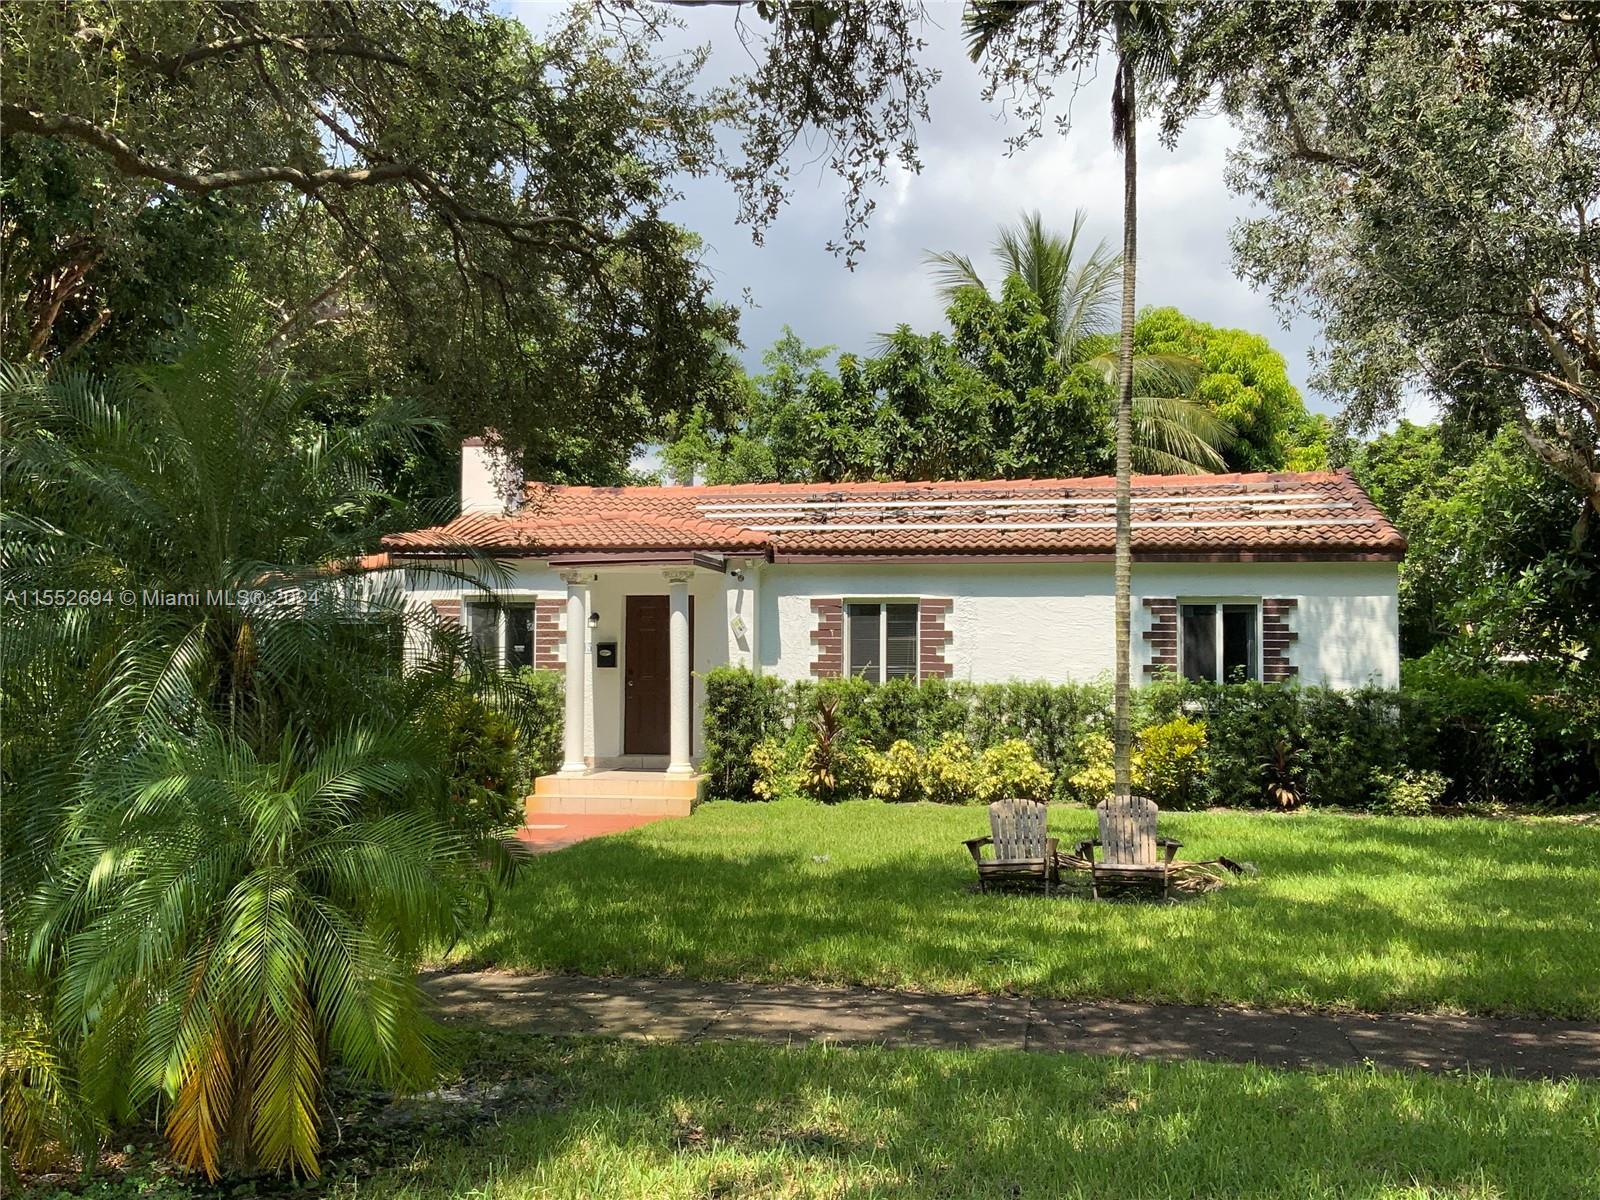 Photo of 43 NW 110th St #0 in Miami Shores, FL